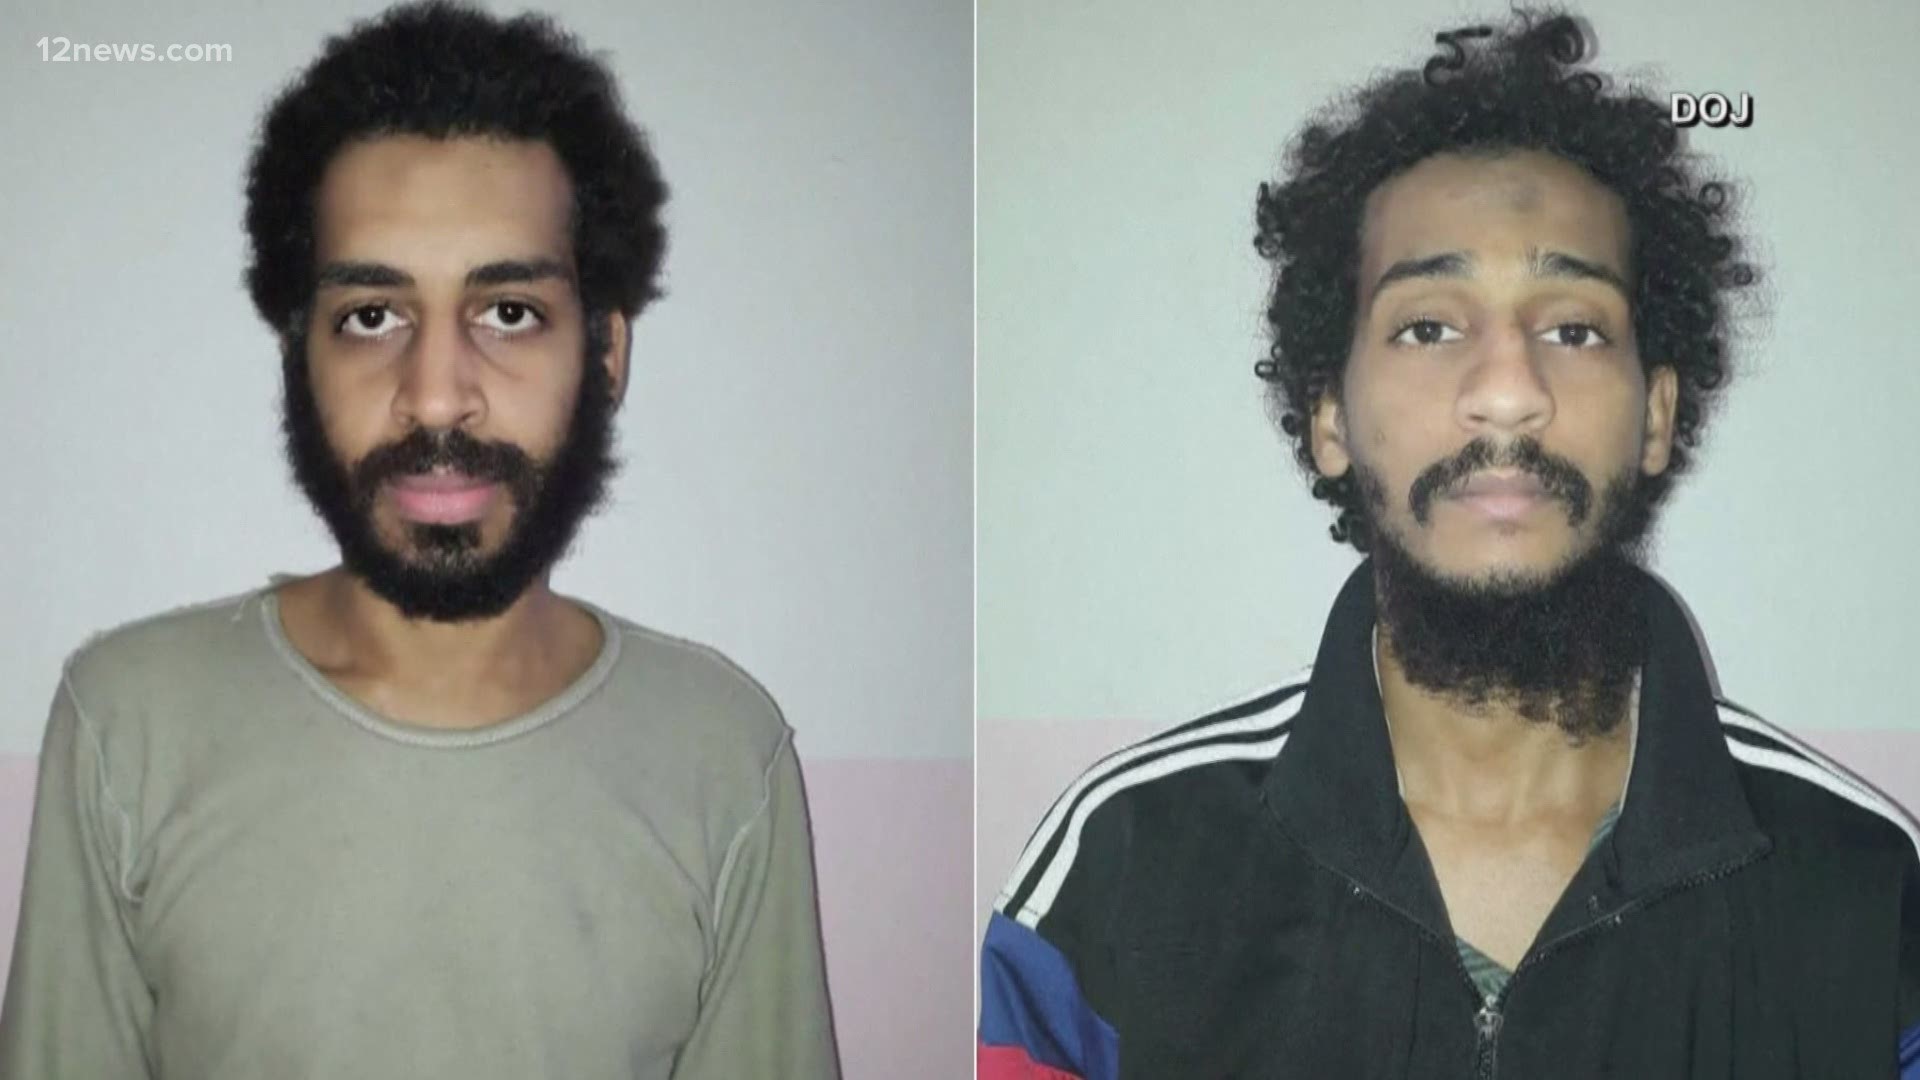 Prosecutors accuse two men of carrying out a gruesome campaign of beheadings, torture and other acts of violence against Western hostages they had captured in Syria.